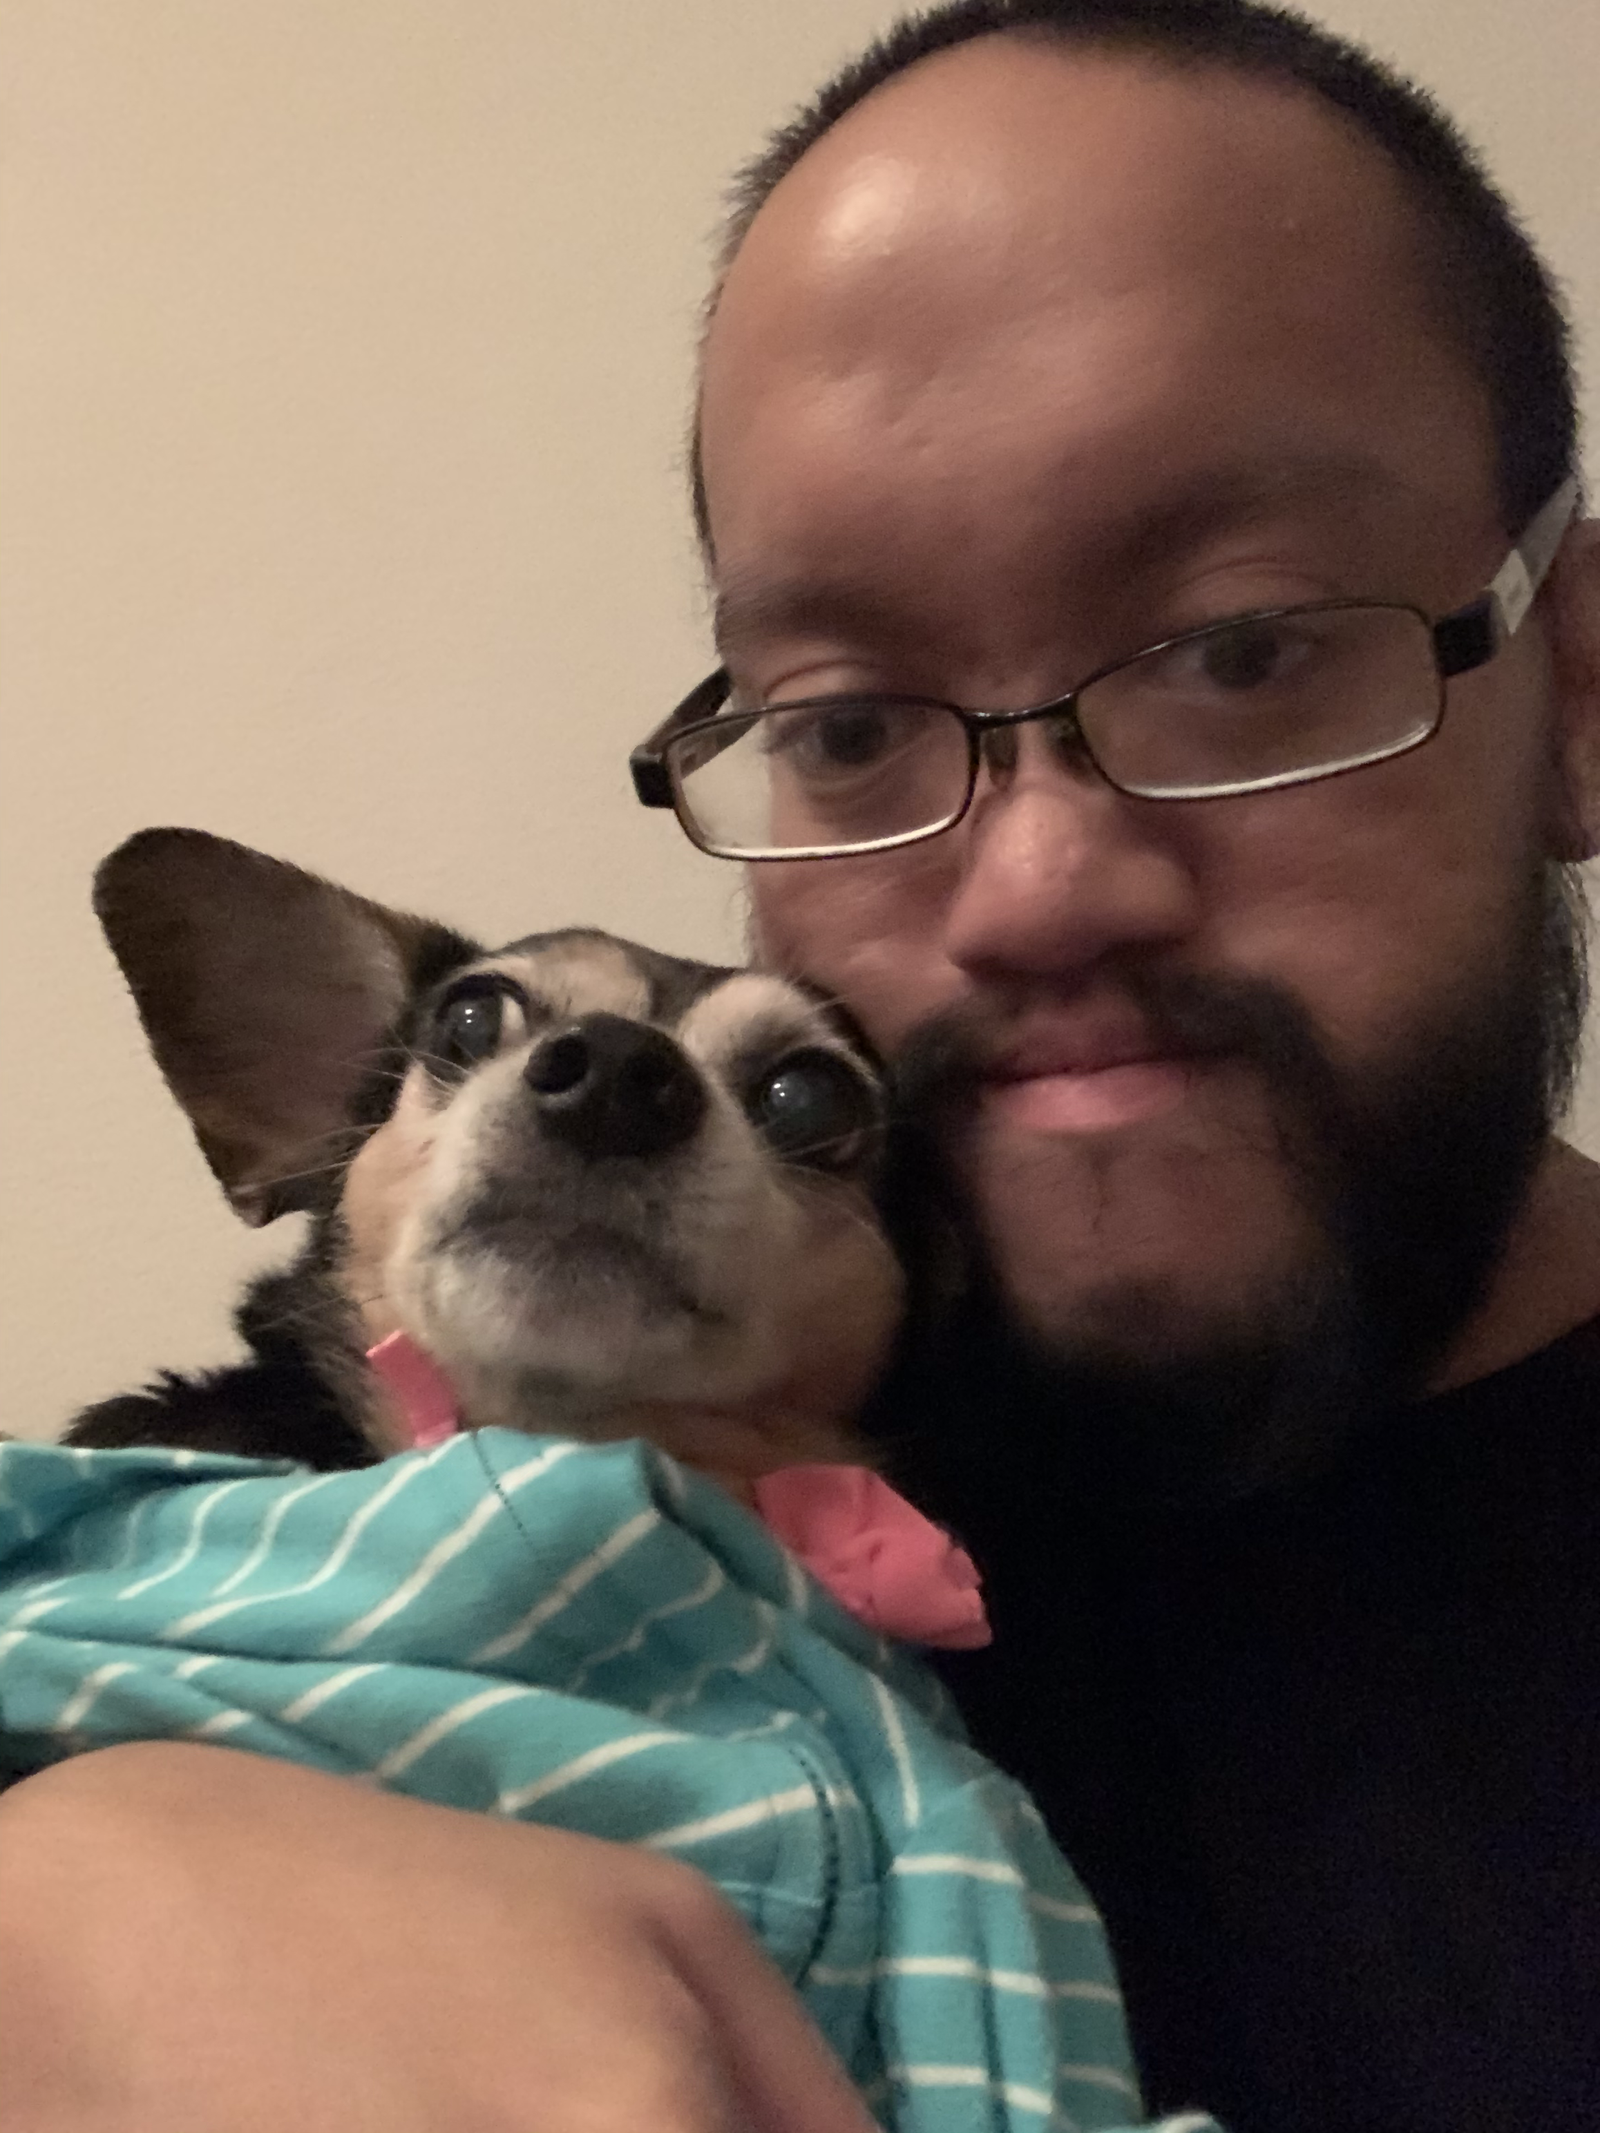 A picture of me and my dachshund-chihuahua mix Kiba.